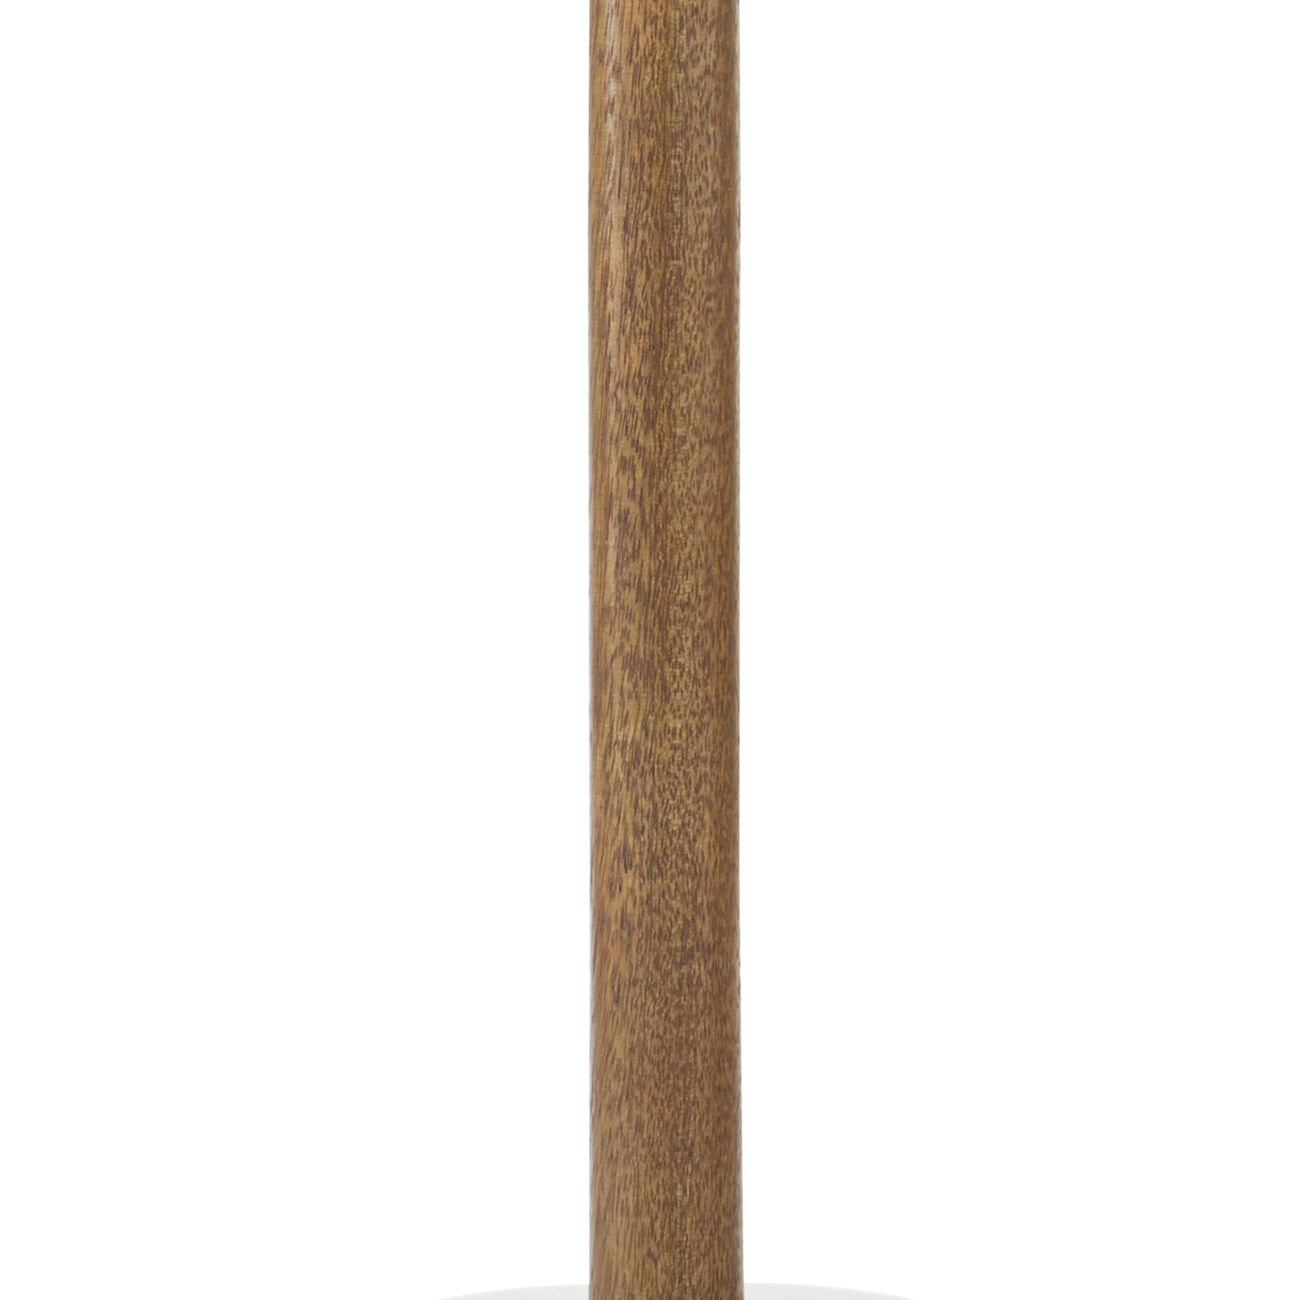 Wooden Paper Towel Holder with Round Marble Base, Brown and White